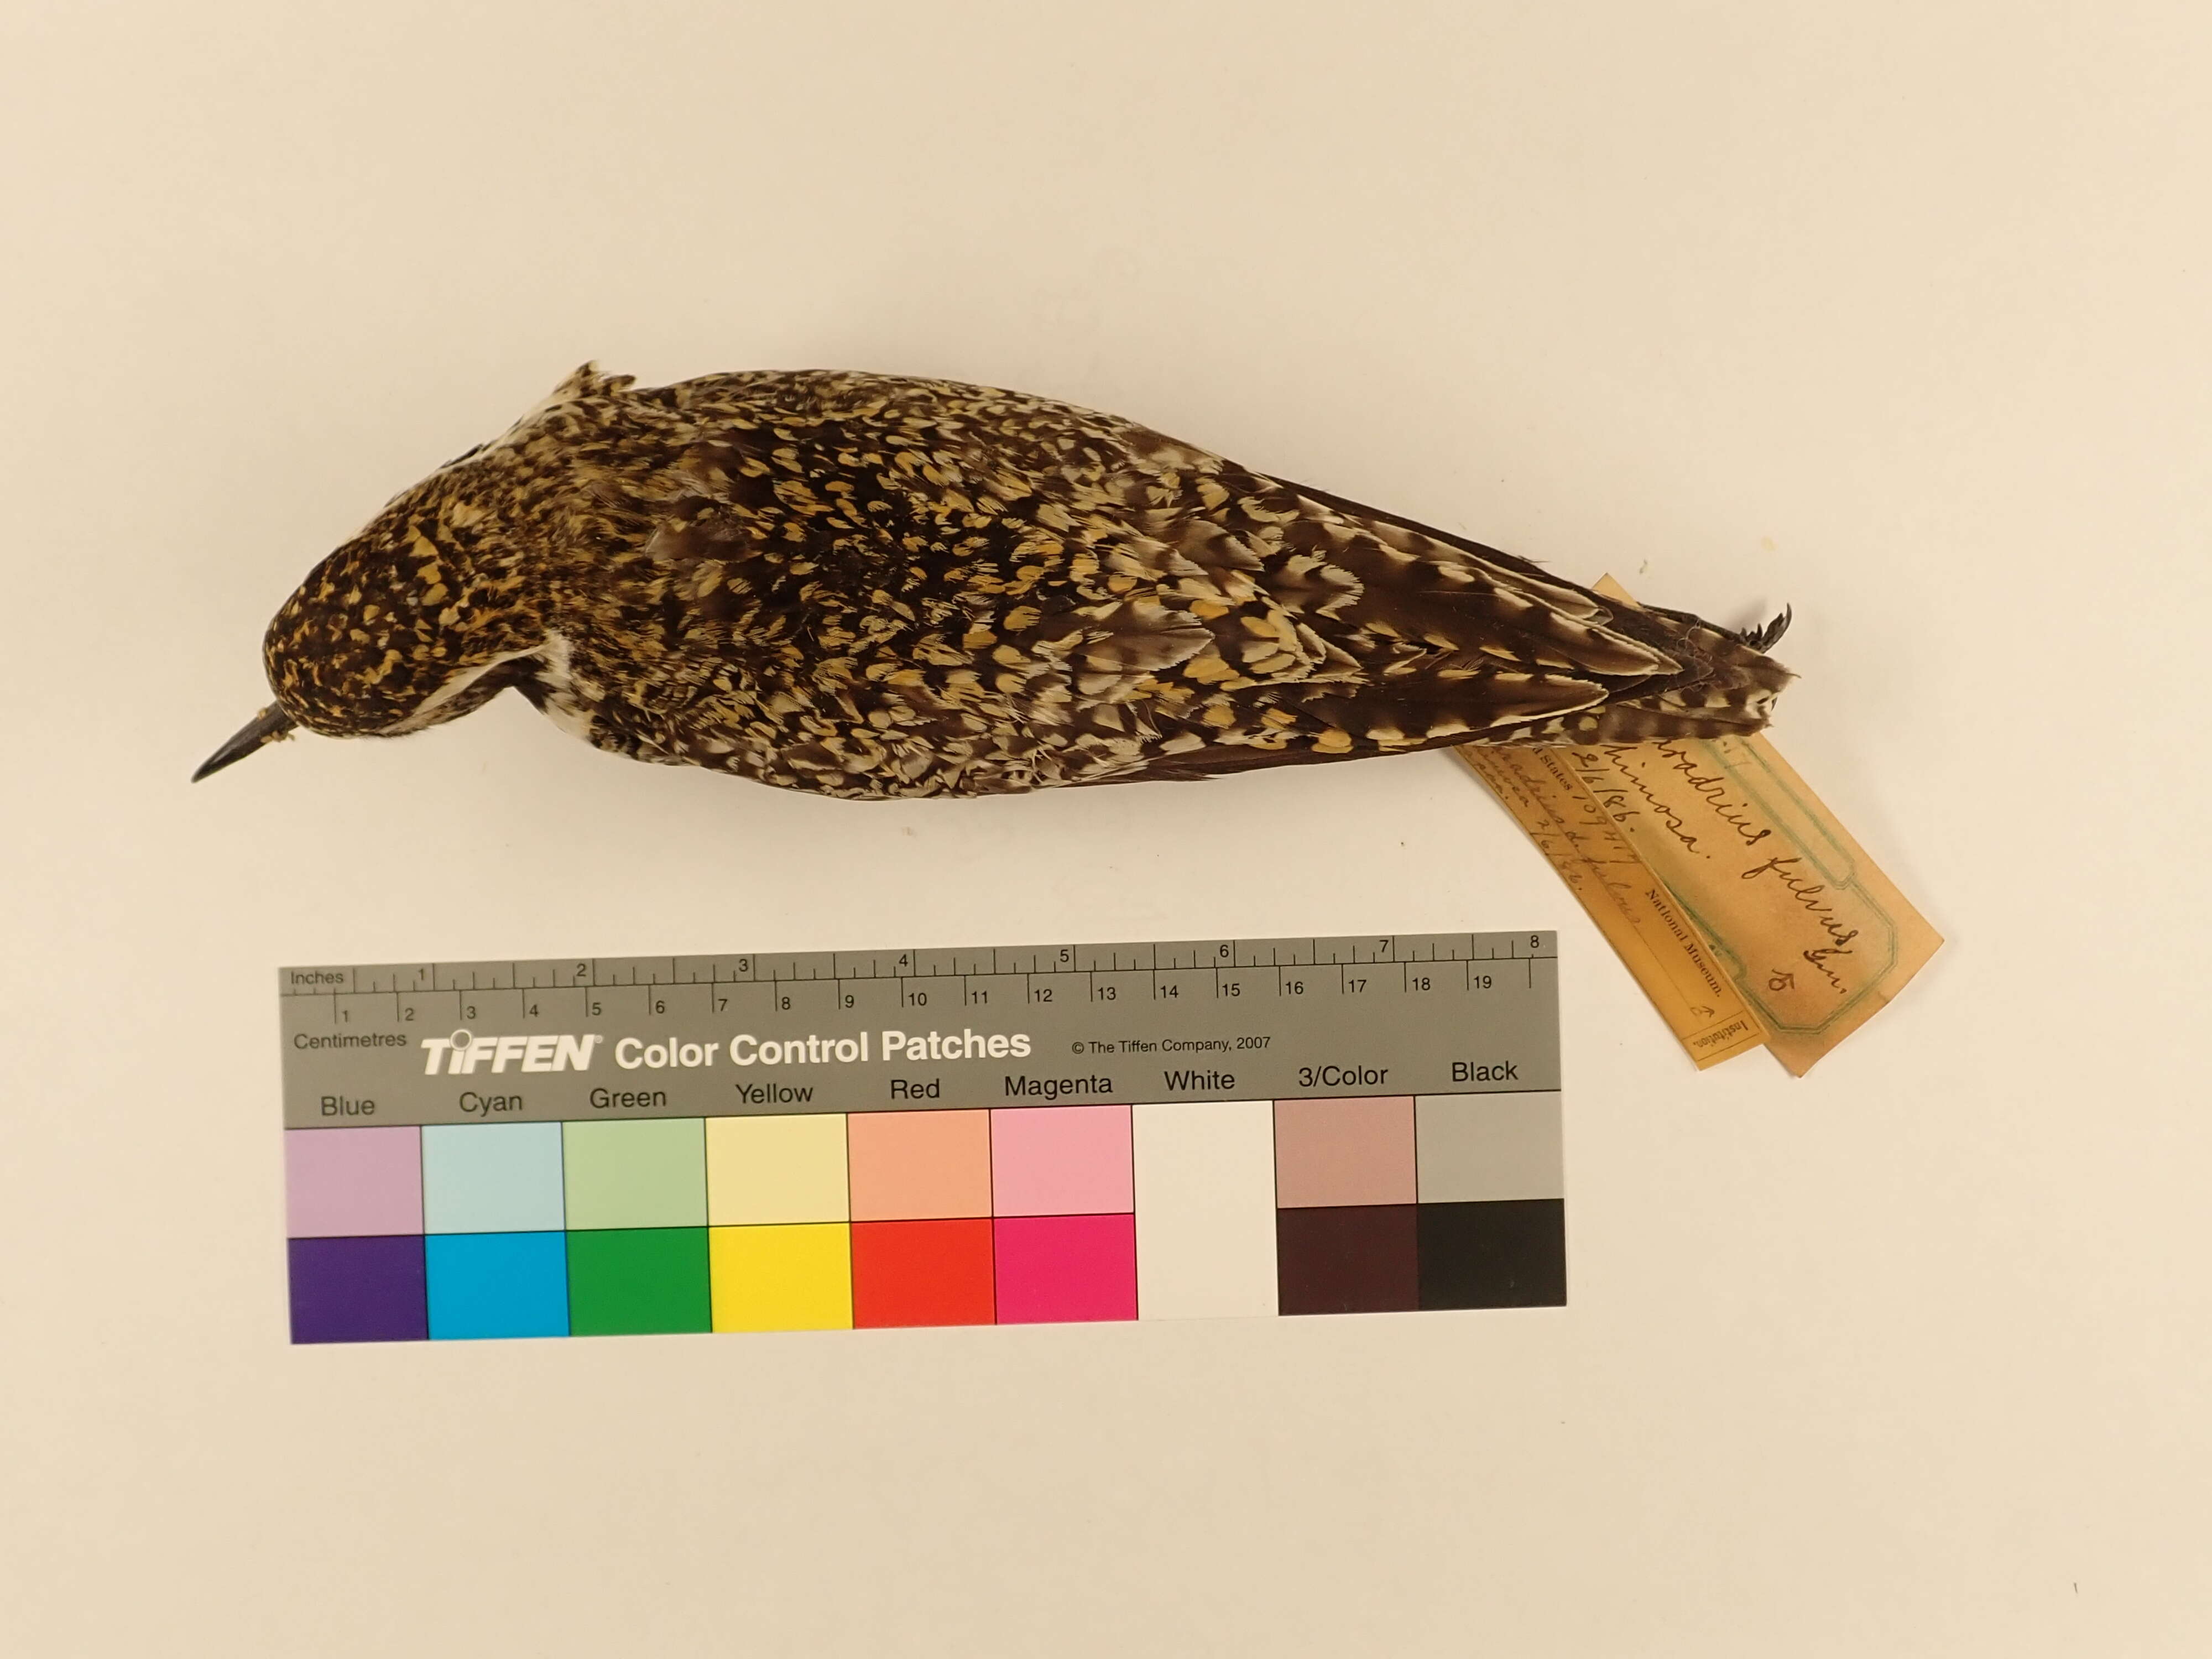 Image of Pacific Golden Plover